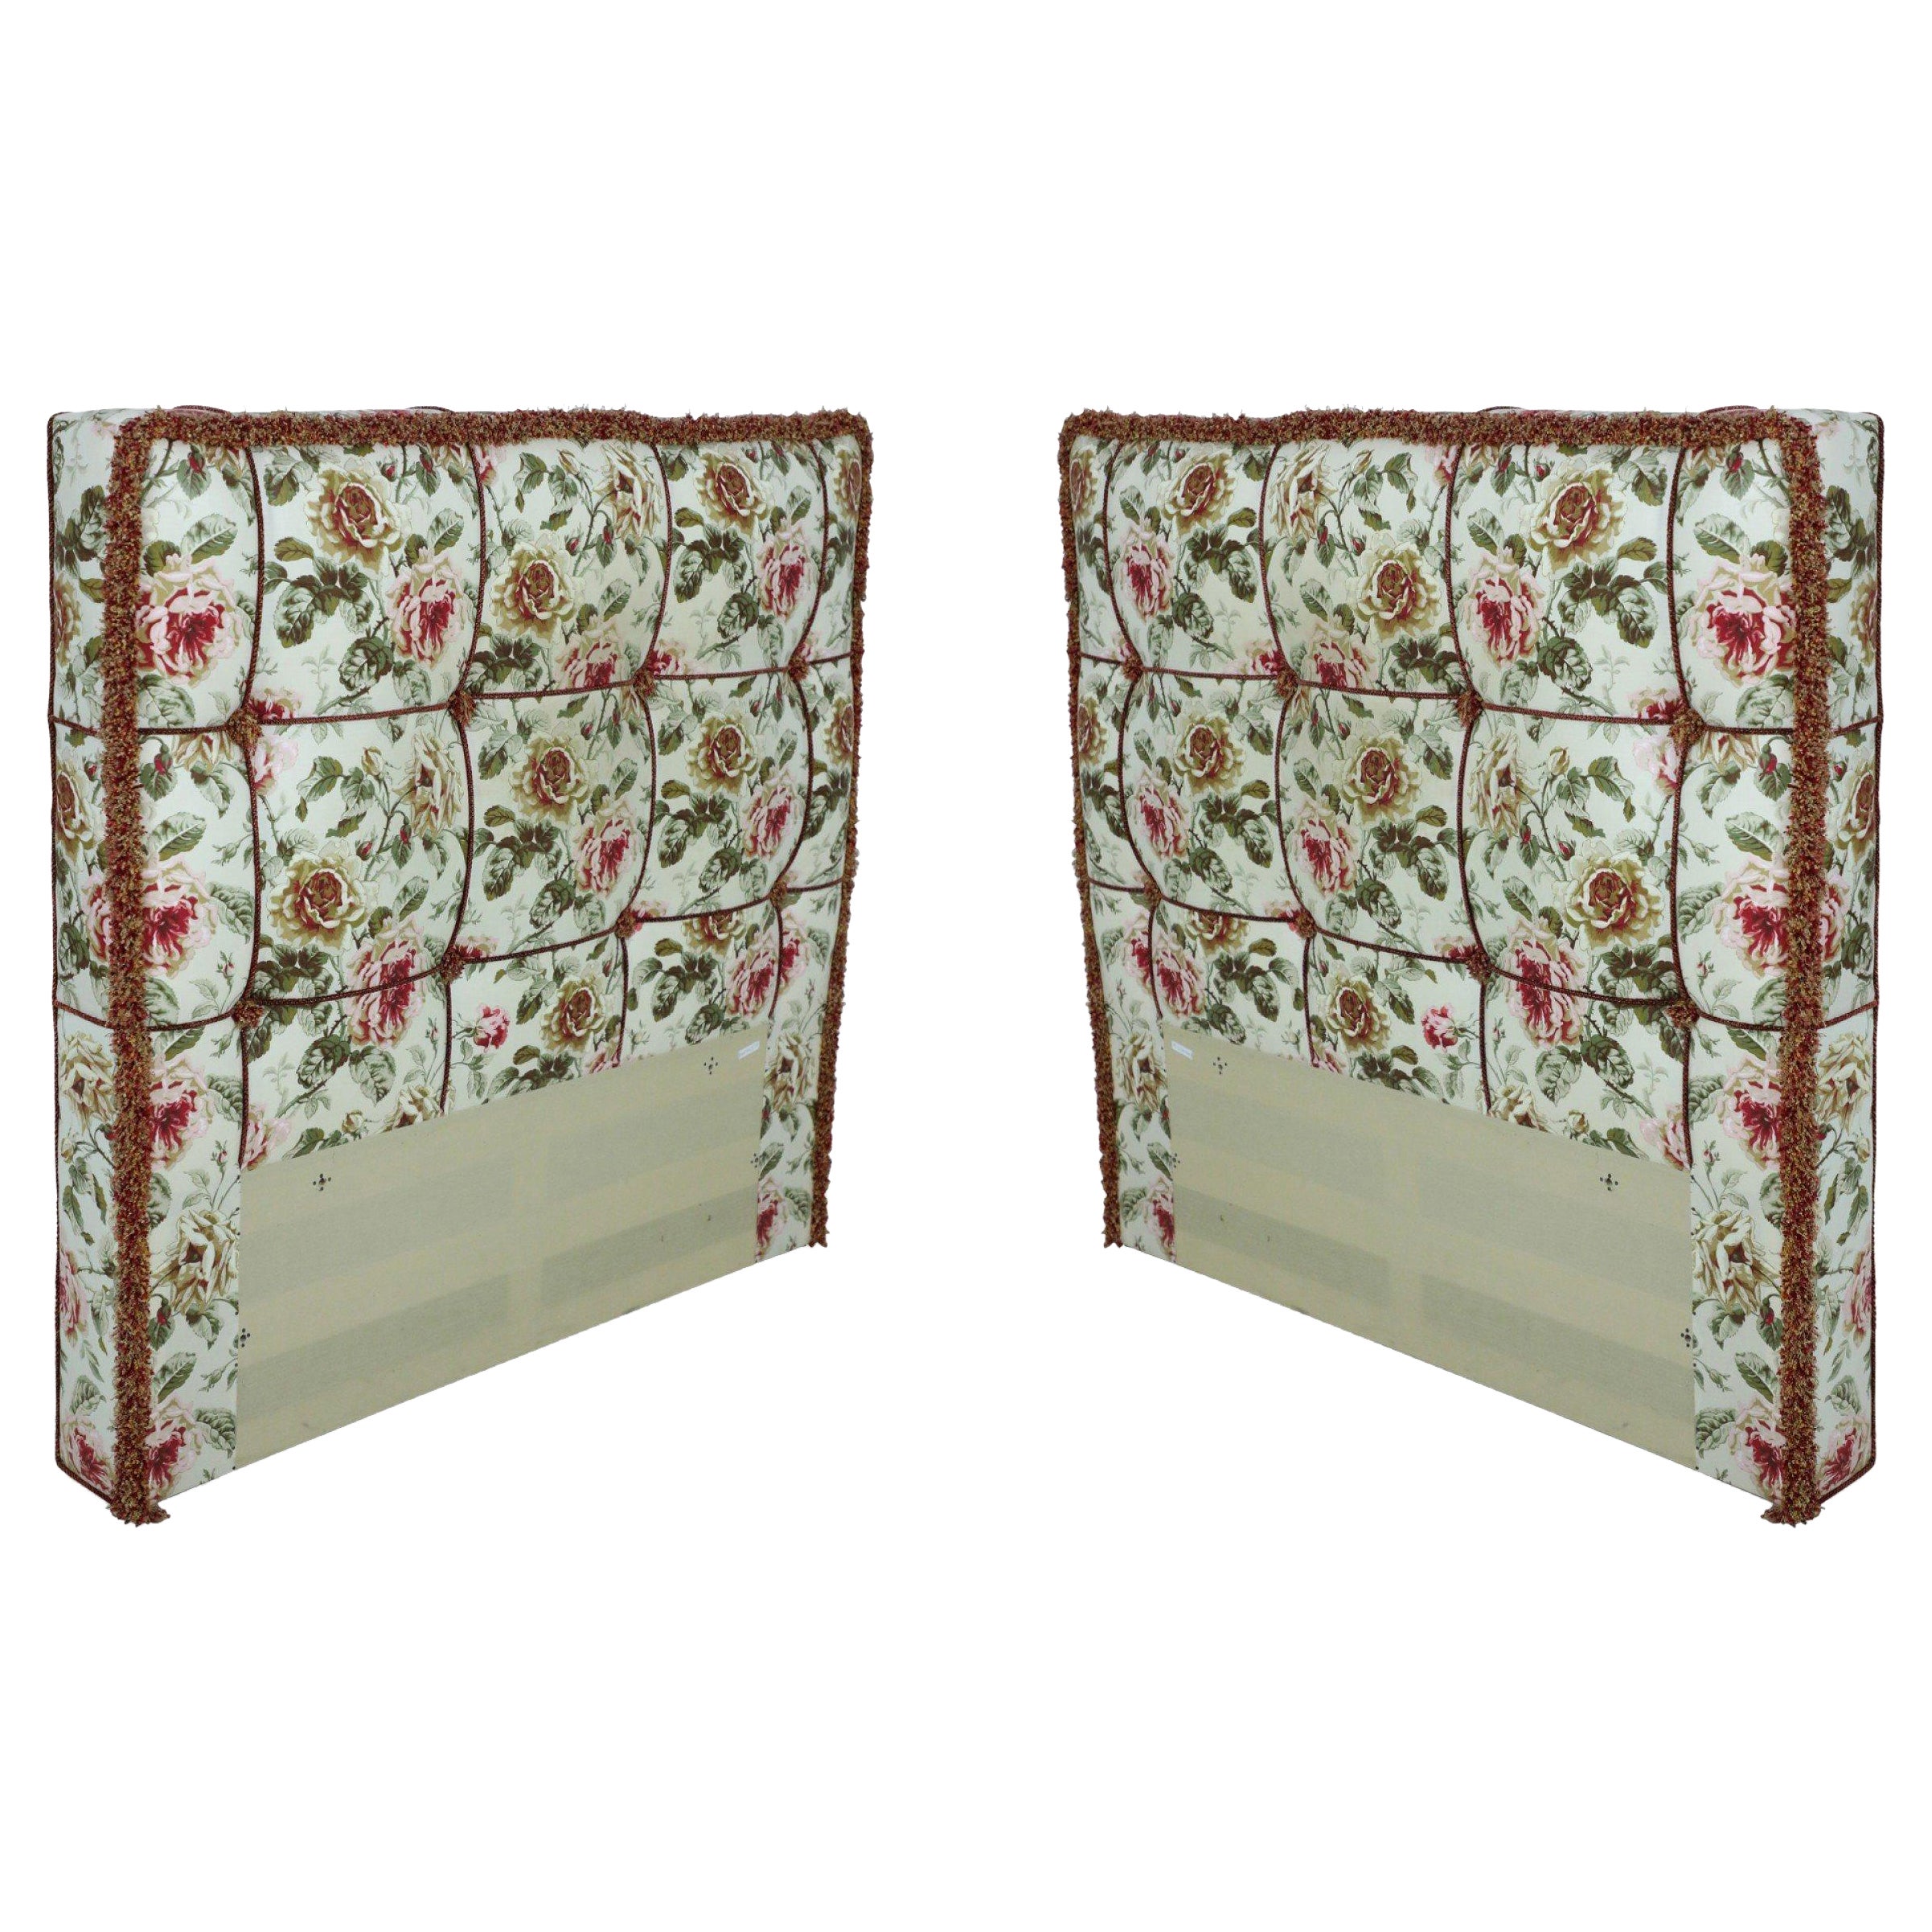 Pair of Contemporary Floral Tufted Upholstered Twin-Size Headboards